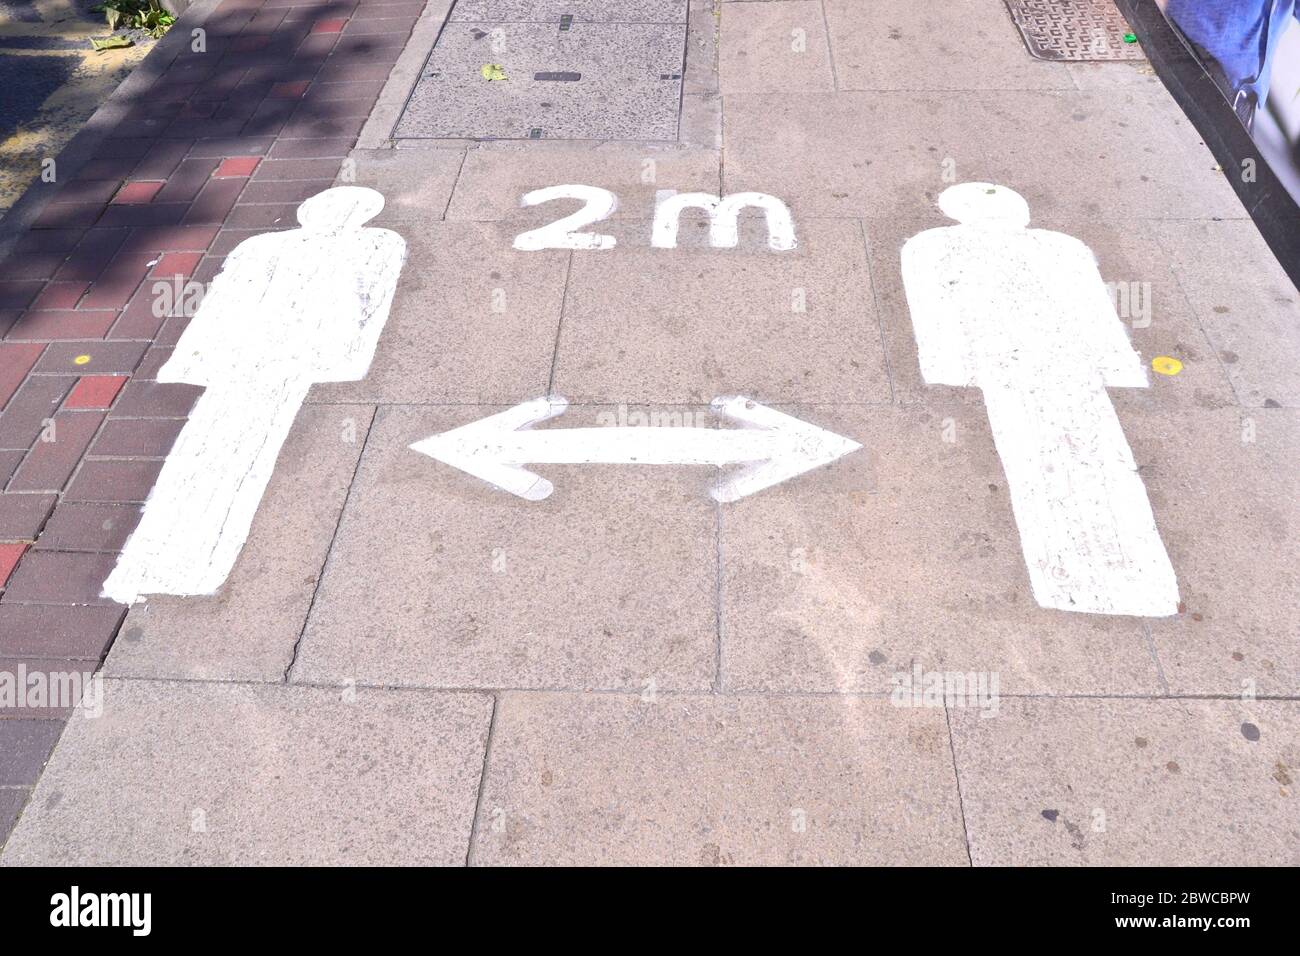 Markings on the pavement in central Manchester, England, United Kingdom remind pedestrians to keep 2 metres apart during the Coronavirus pandemic. In May 2020 uk Government Ministers are reported to be considering whether to relax the two-metre rule for social distancing. Stock Photo